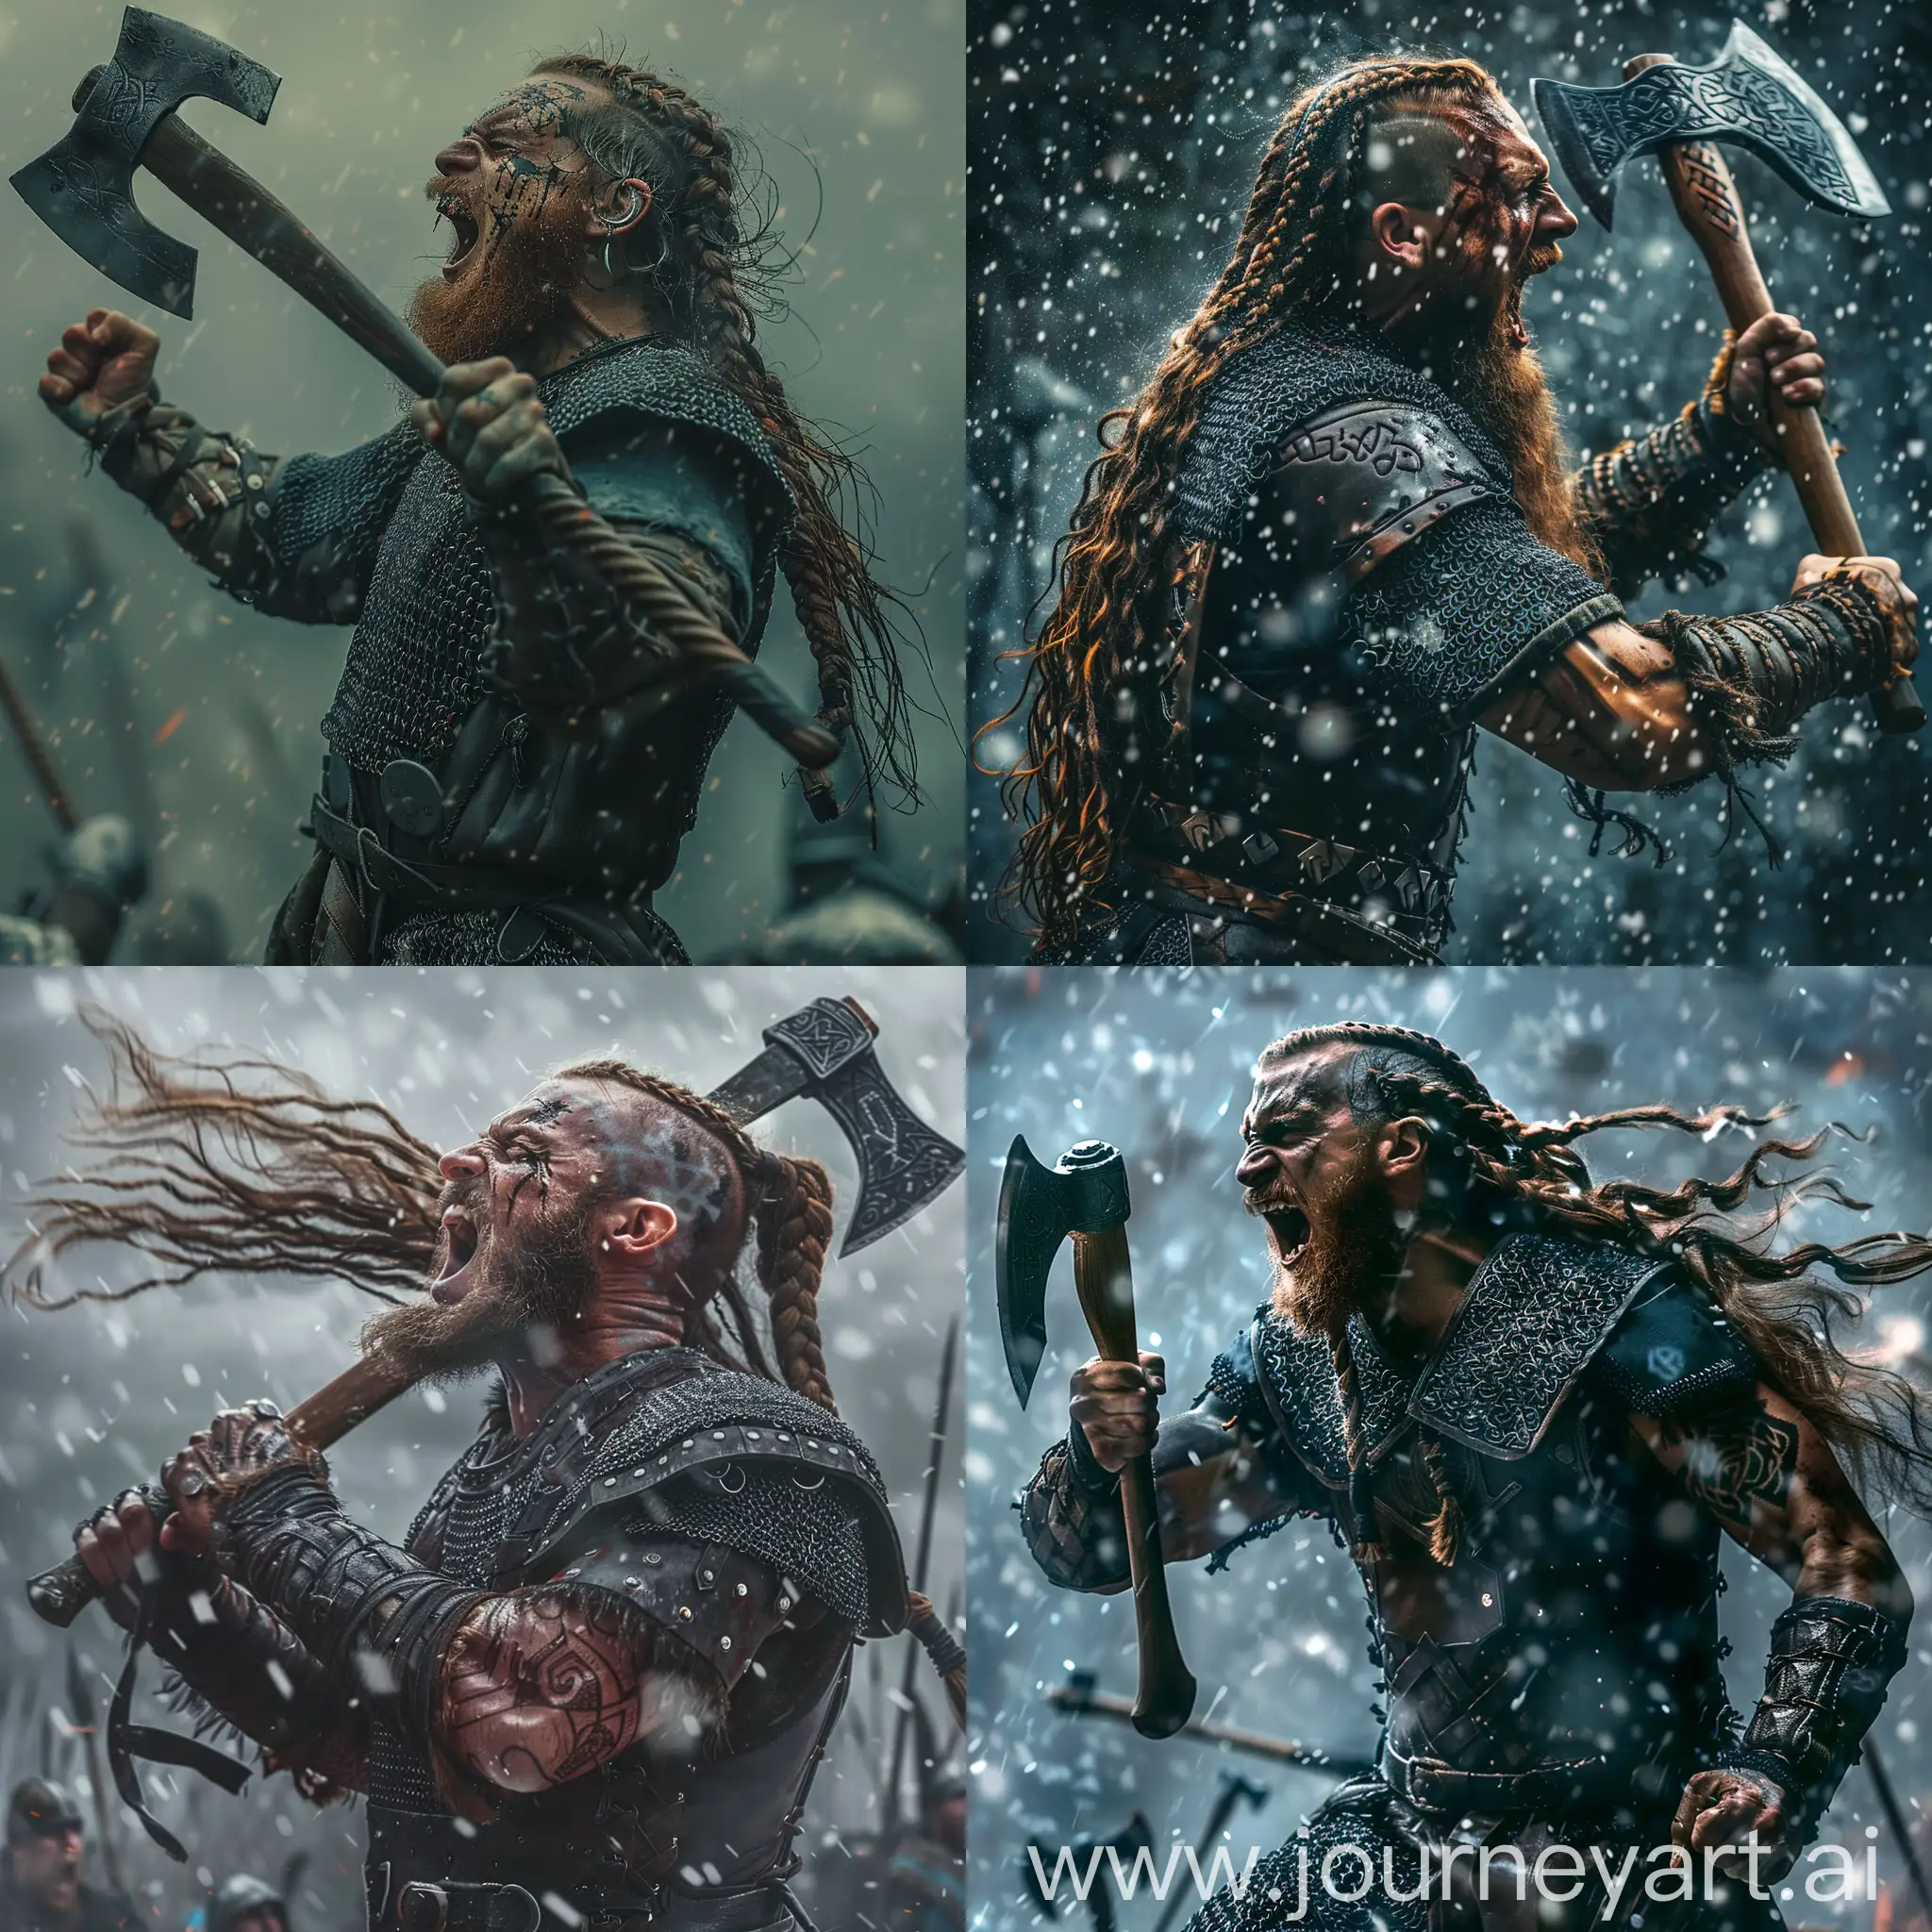 Norse chieftain Erik the Red at battle field, he has dark ginger long hair with braids and long beard, yielding his axe and shouting, chainmail armor, snowy weather, cinematic lighting